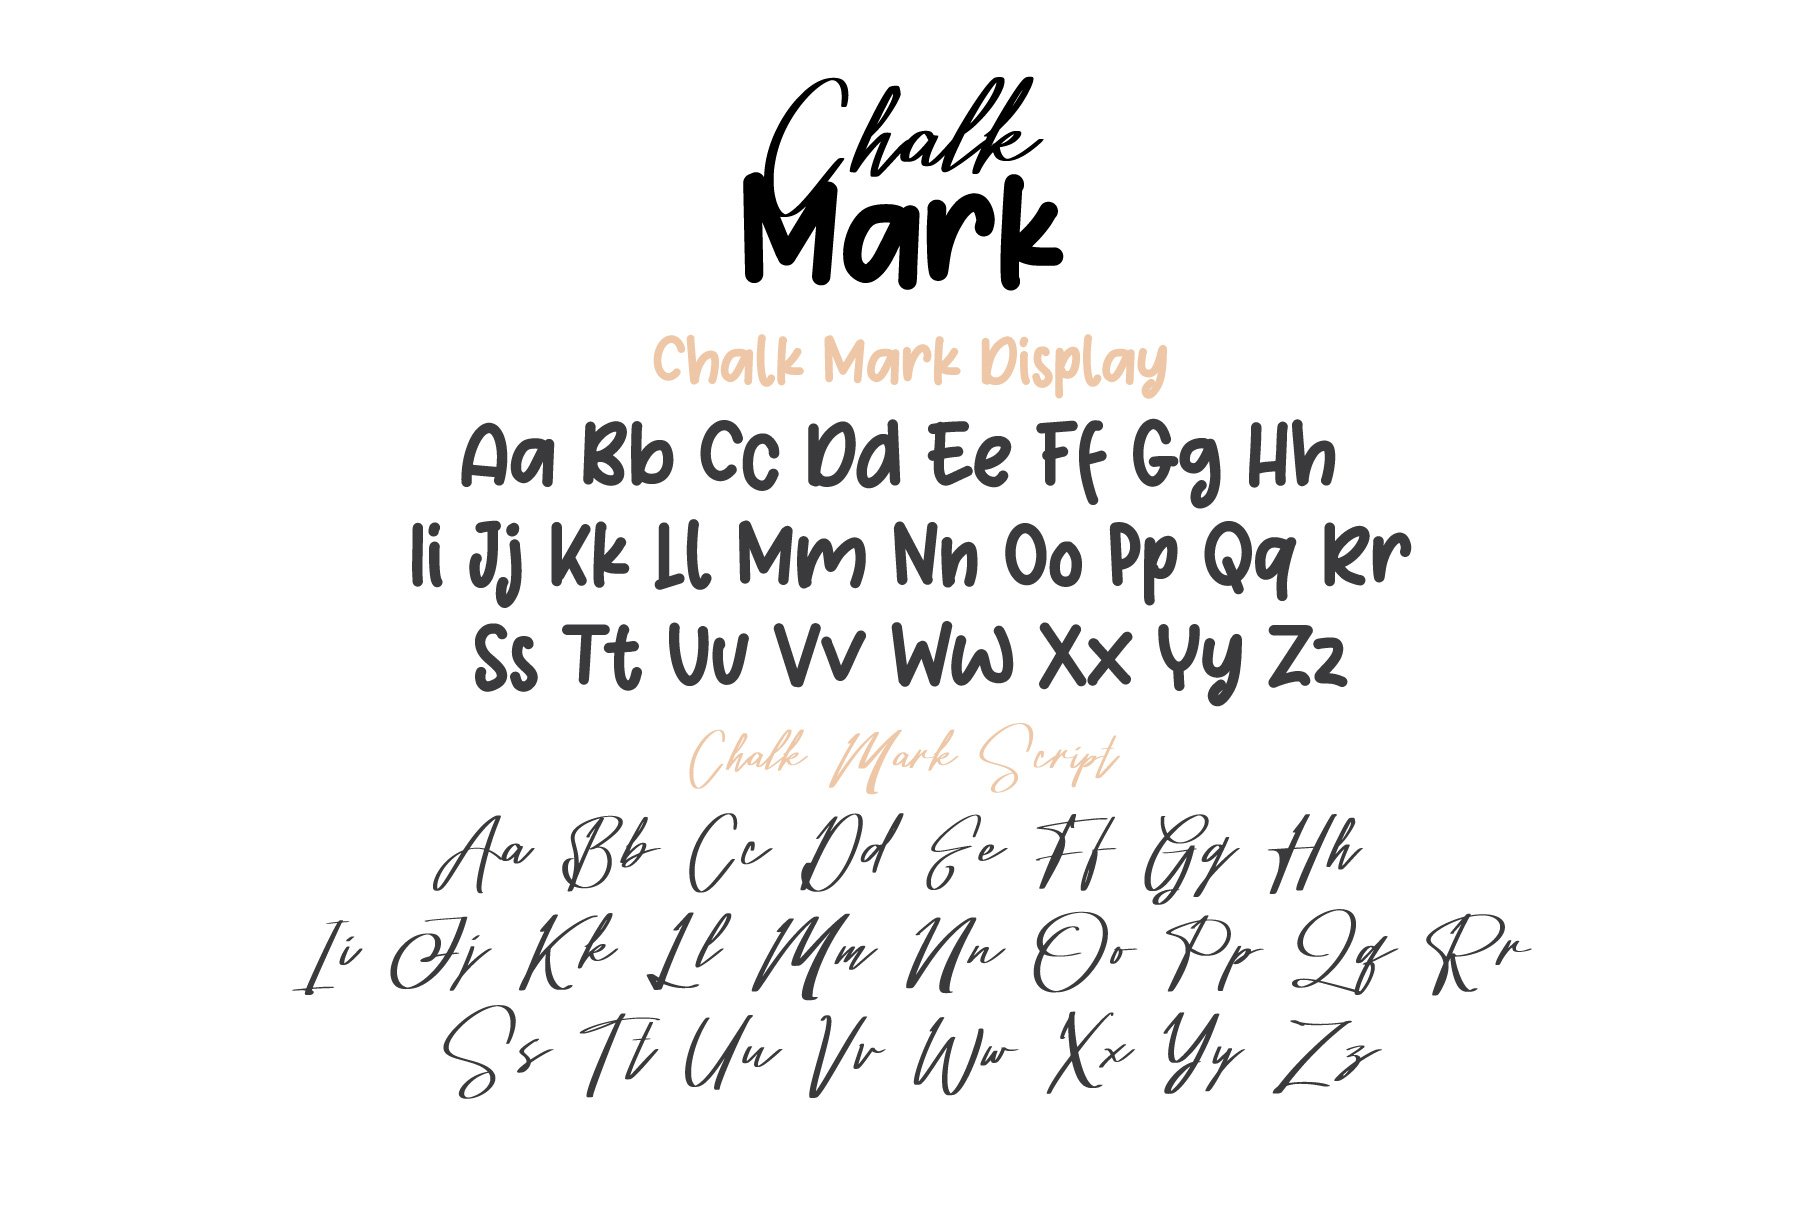 Chalk Markpreview image.